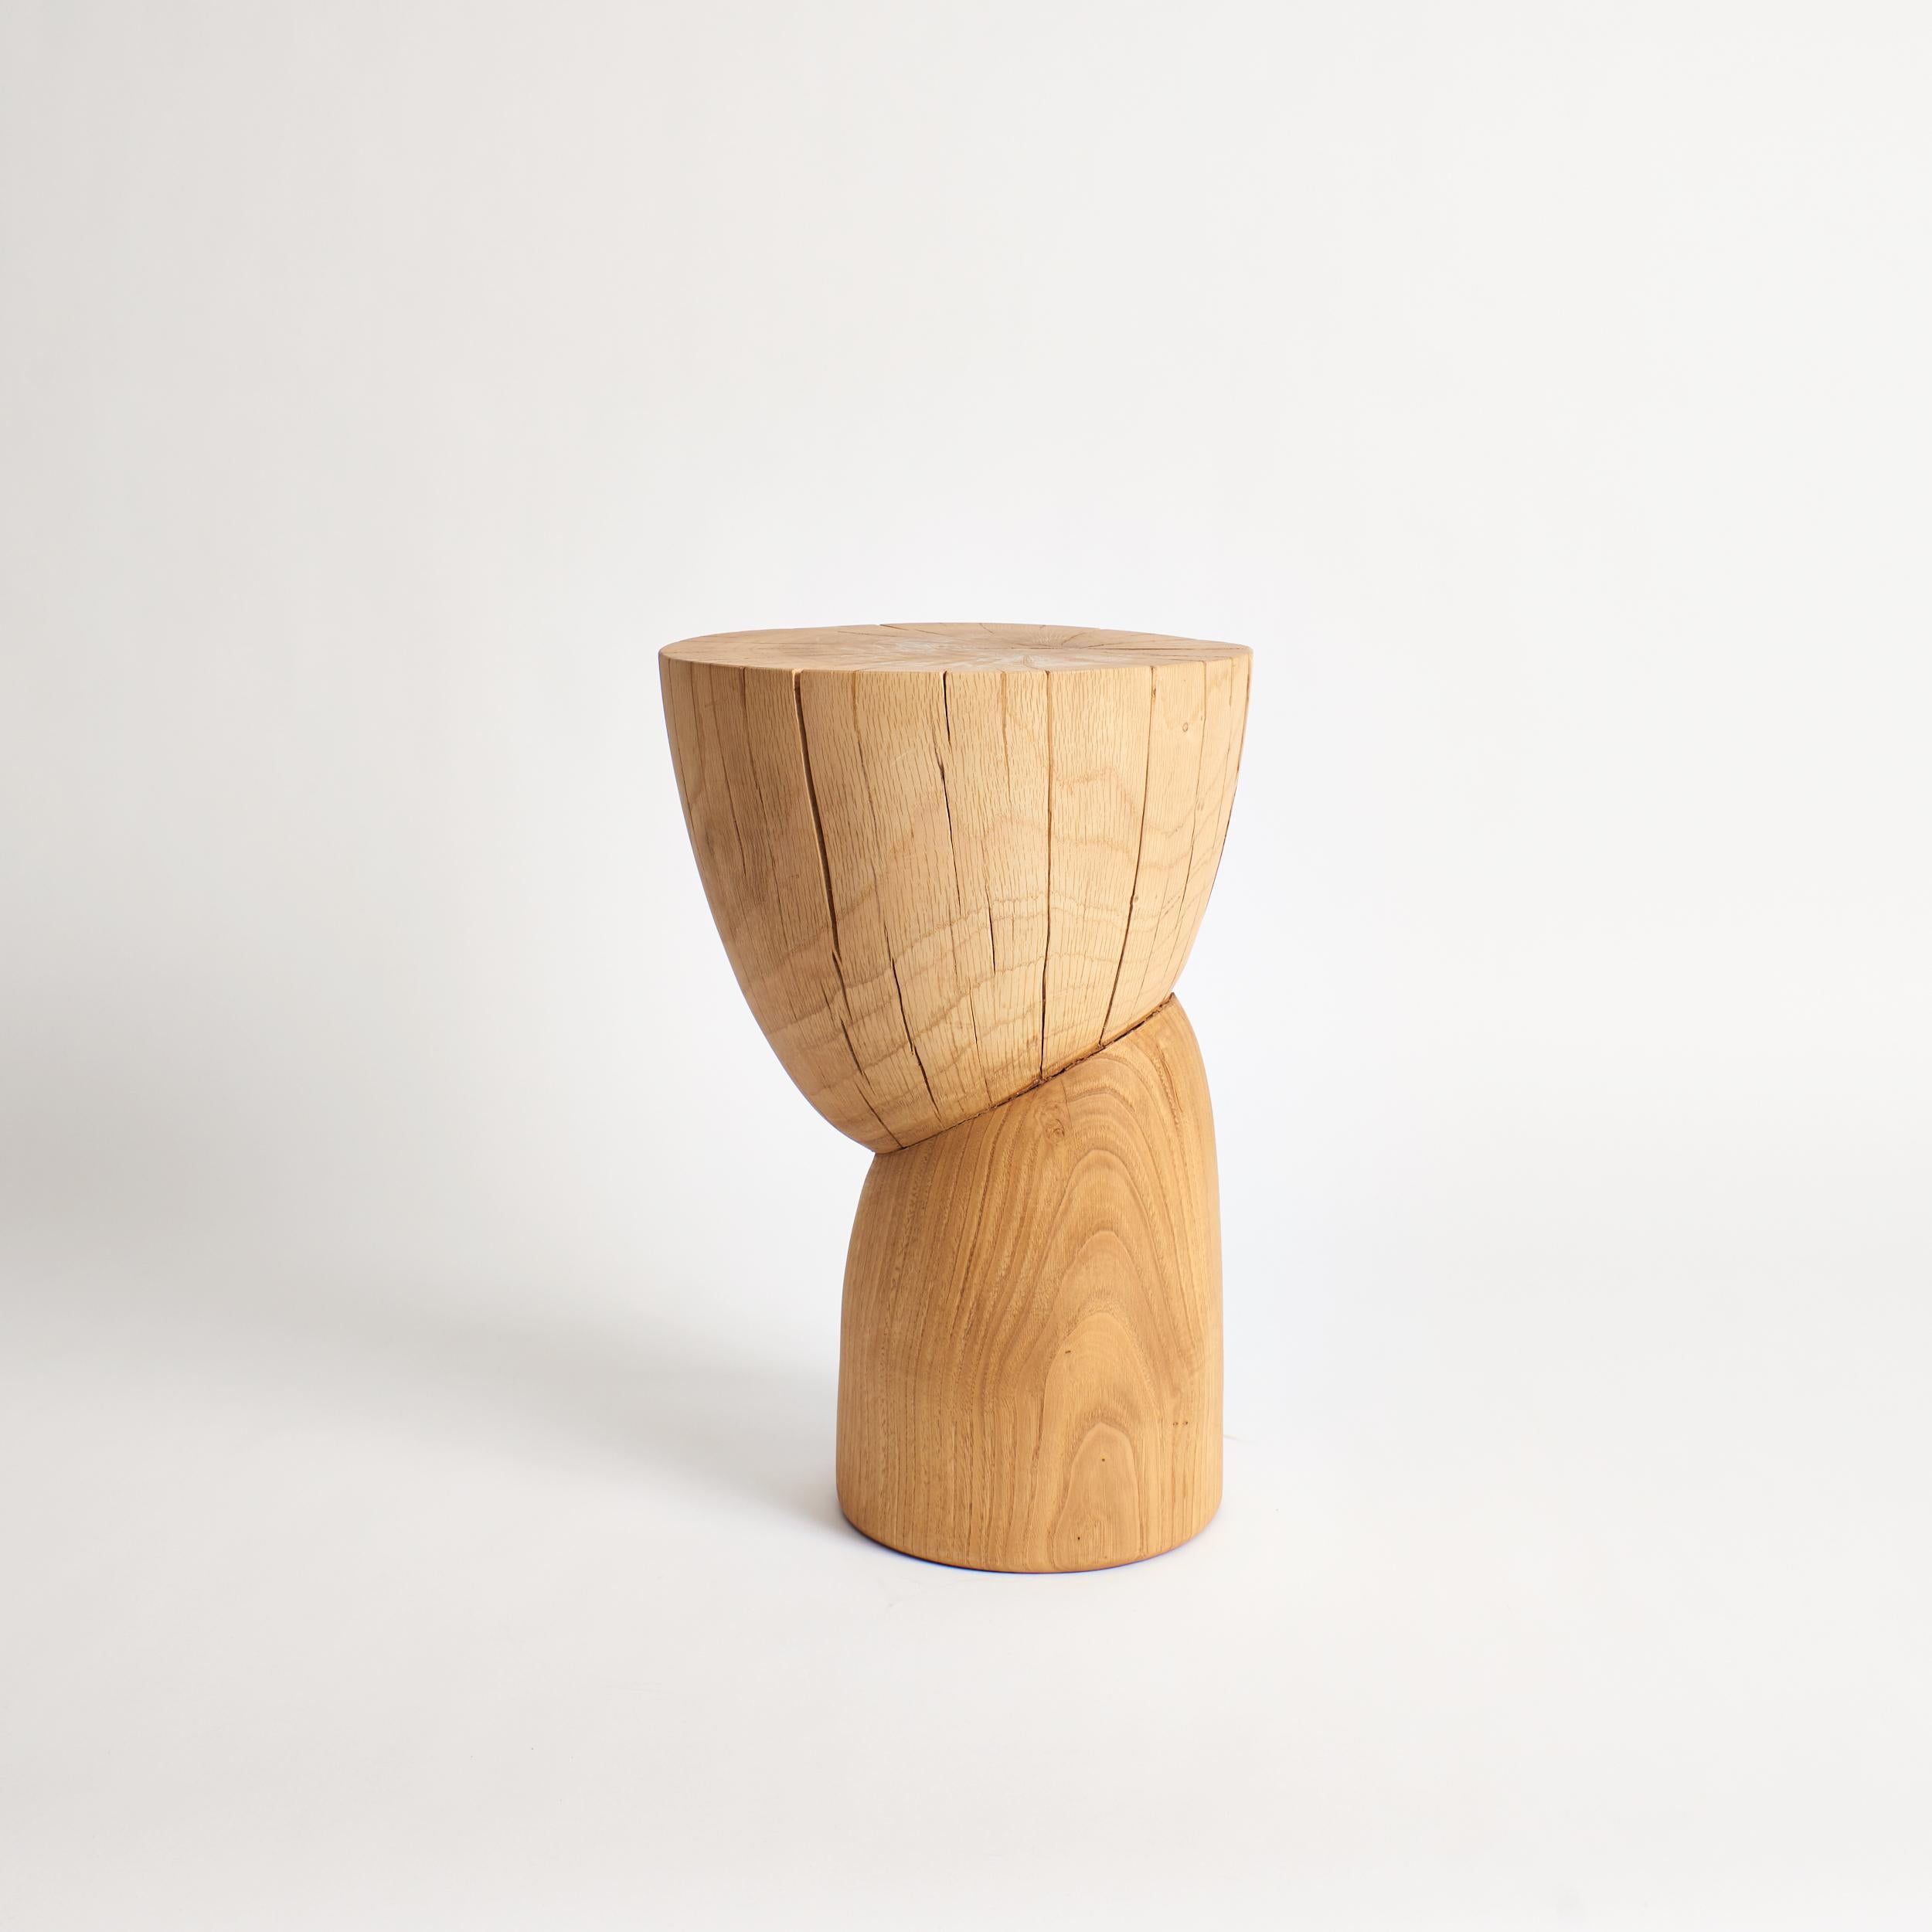 Wooden side table in natural by Project 213A
Dimensions: D 30 x W 30 x H 43.5 cm
Materials: Chestnut wood. 

This sculptural side table is hand carved by local artisans in Portugal using solid wood. Available in natural or darker brown